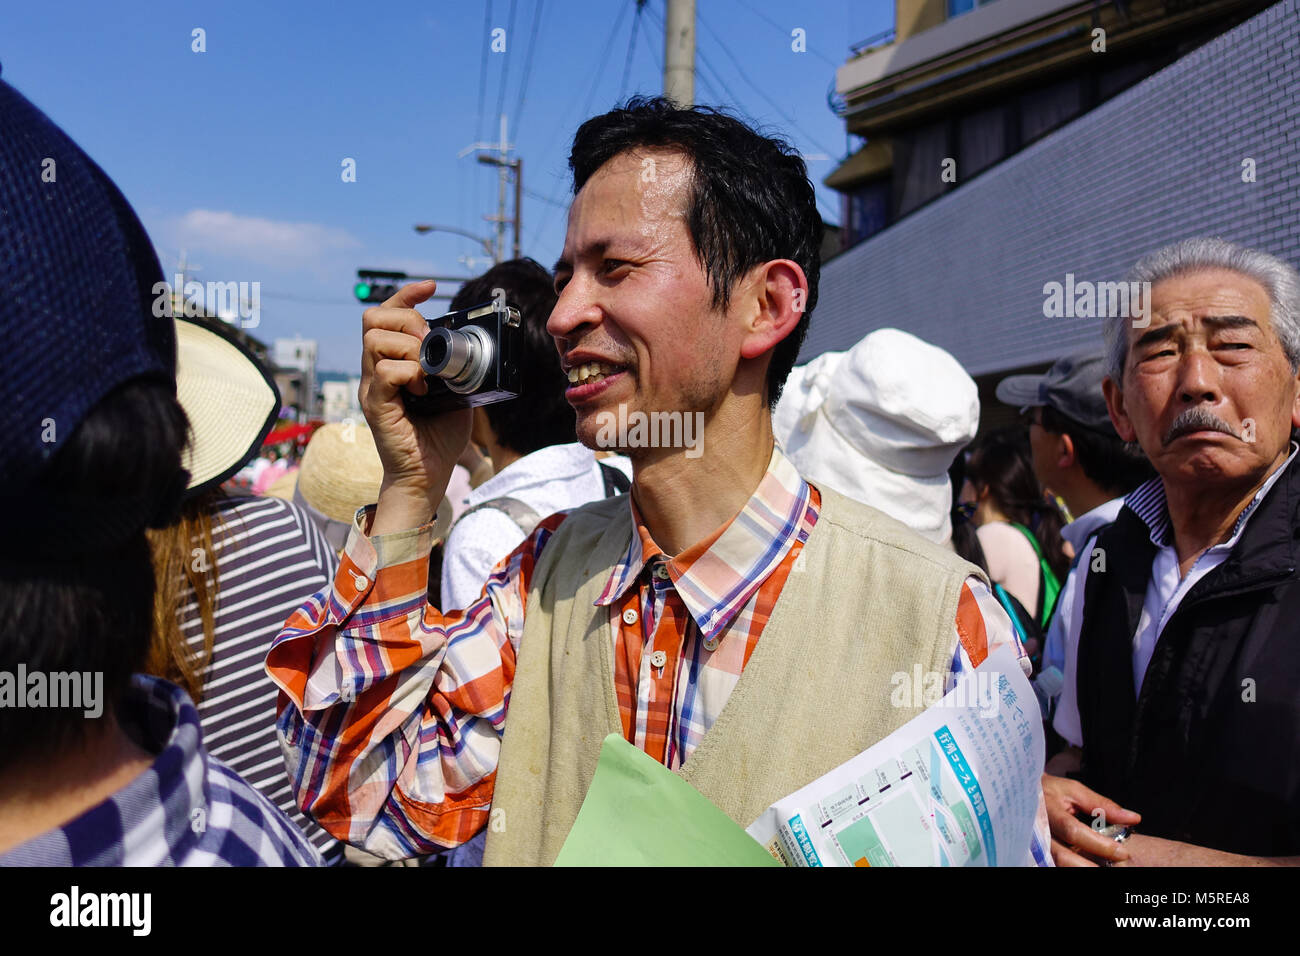 Man in crowd smiling as he snaps a picture on a bright day in Japan. Stock Photo